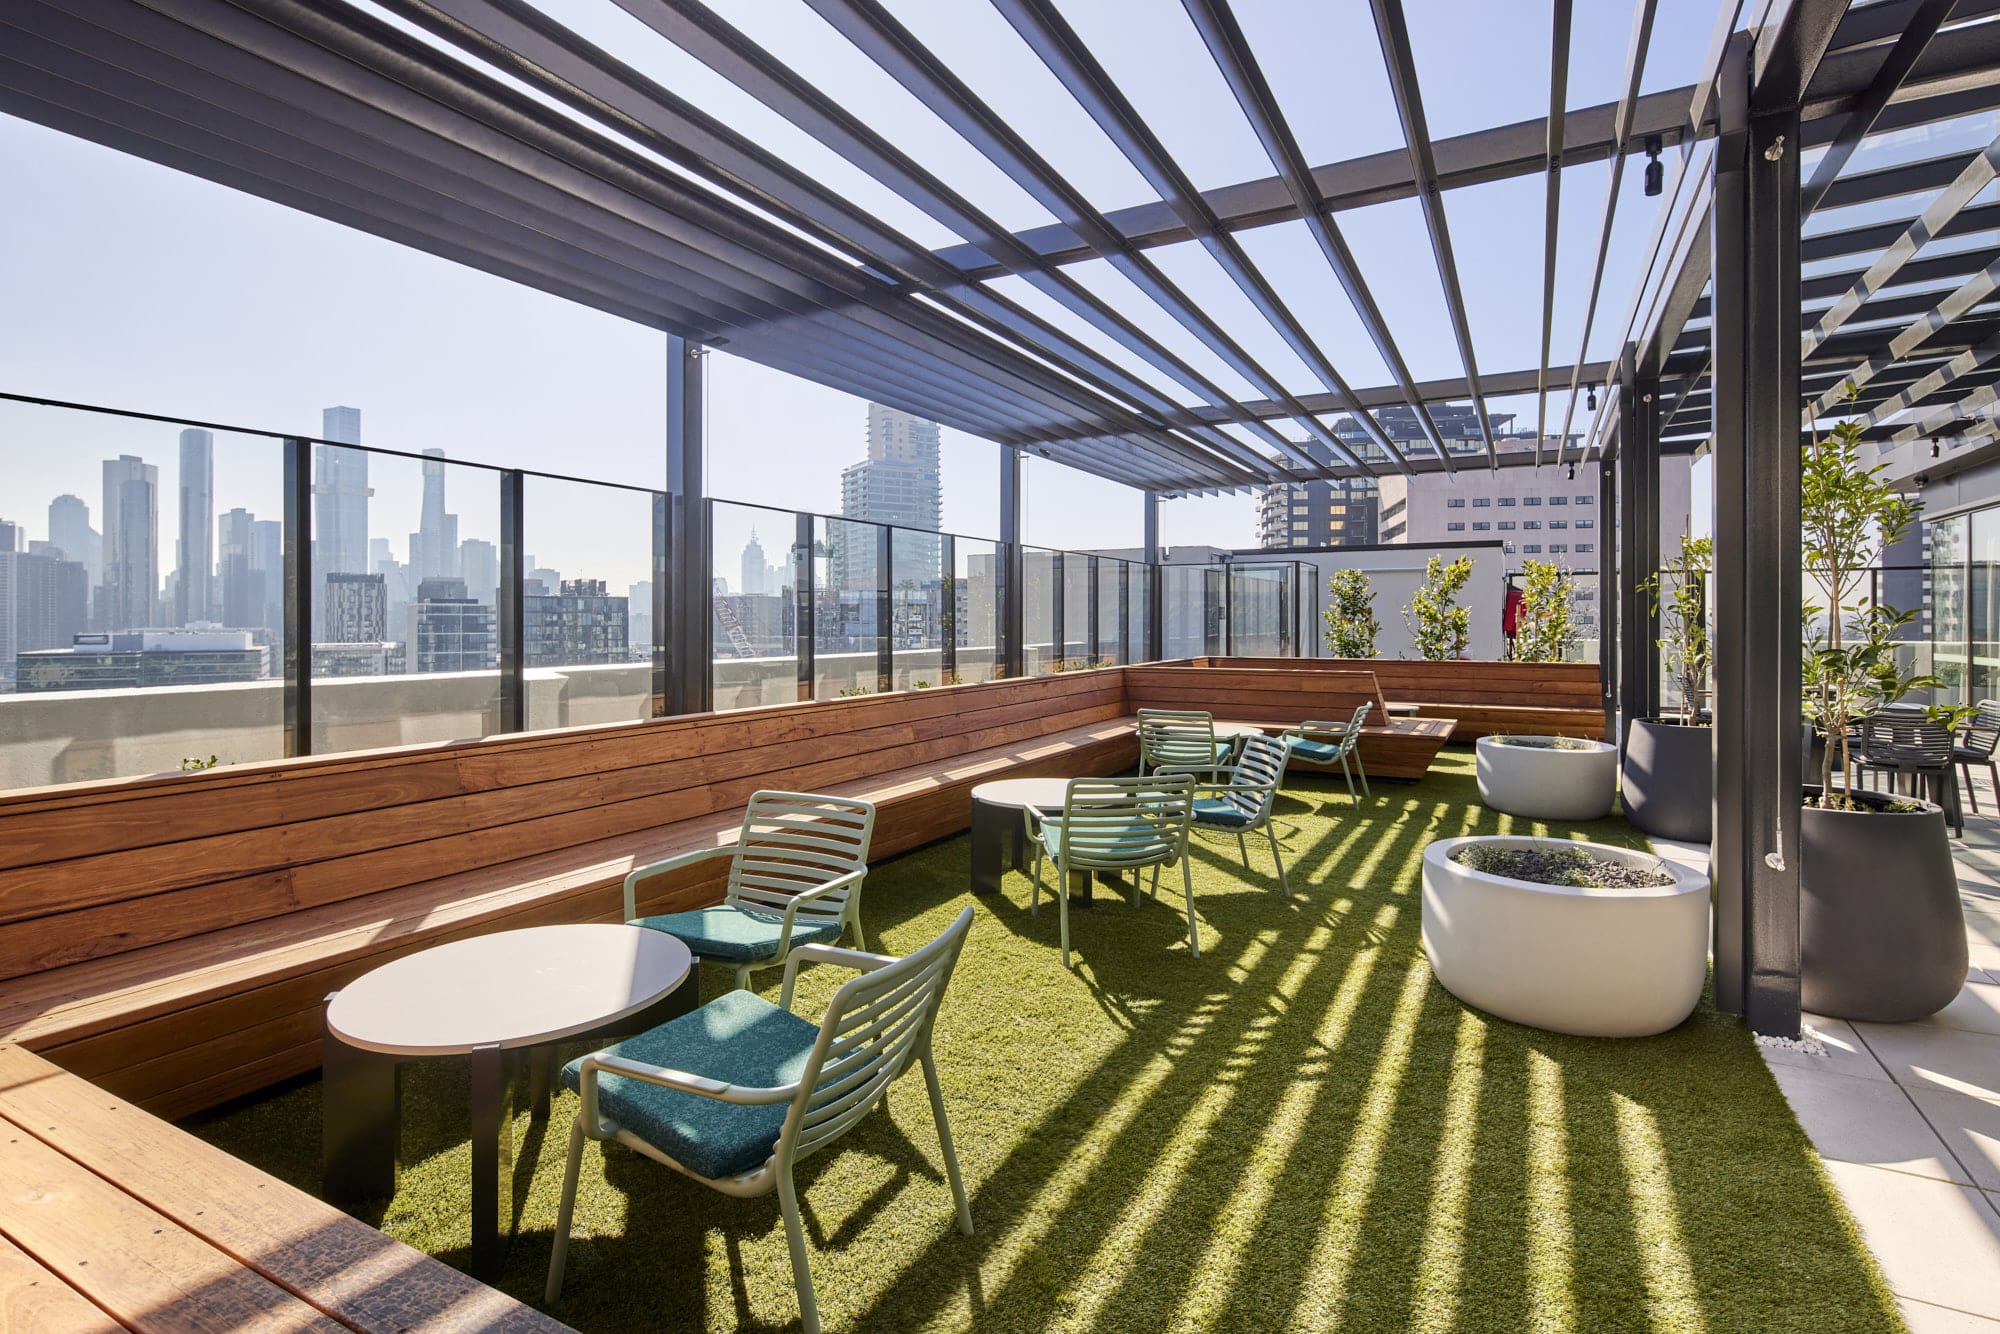 Magnificent rooftop terrace with views to the city and beyond